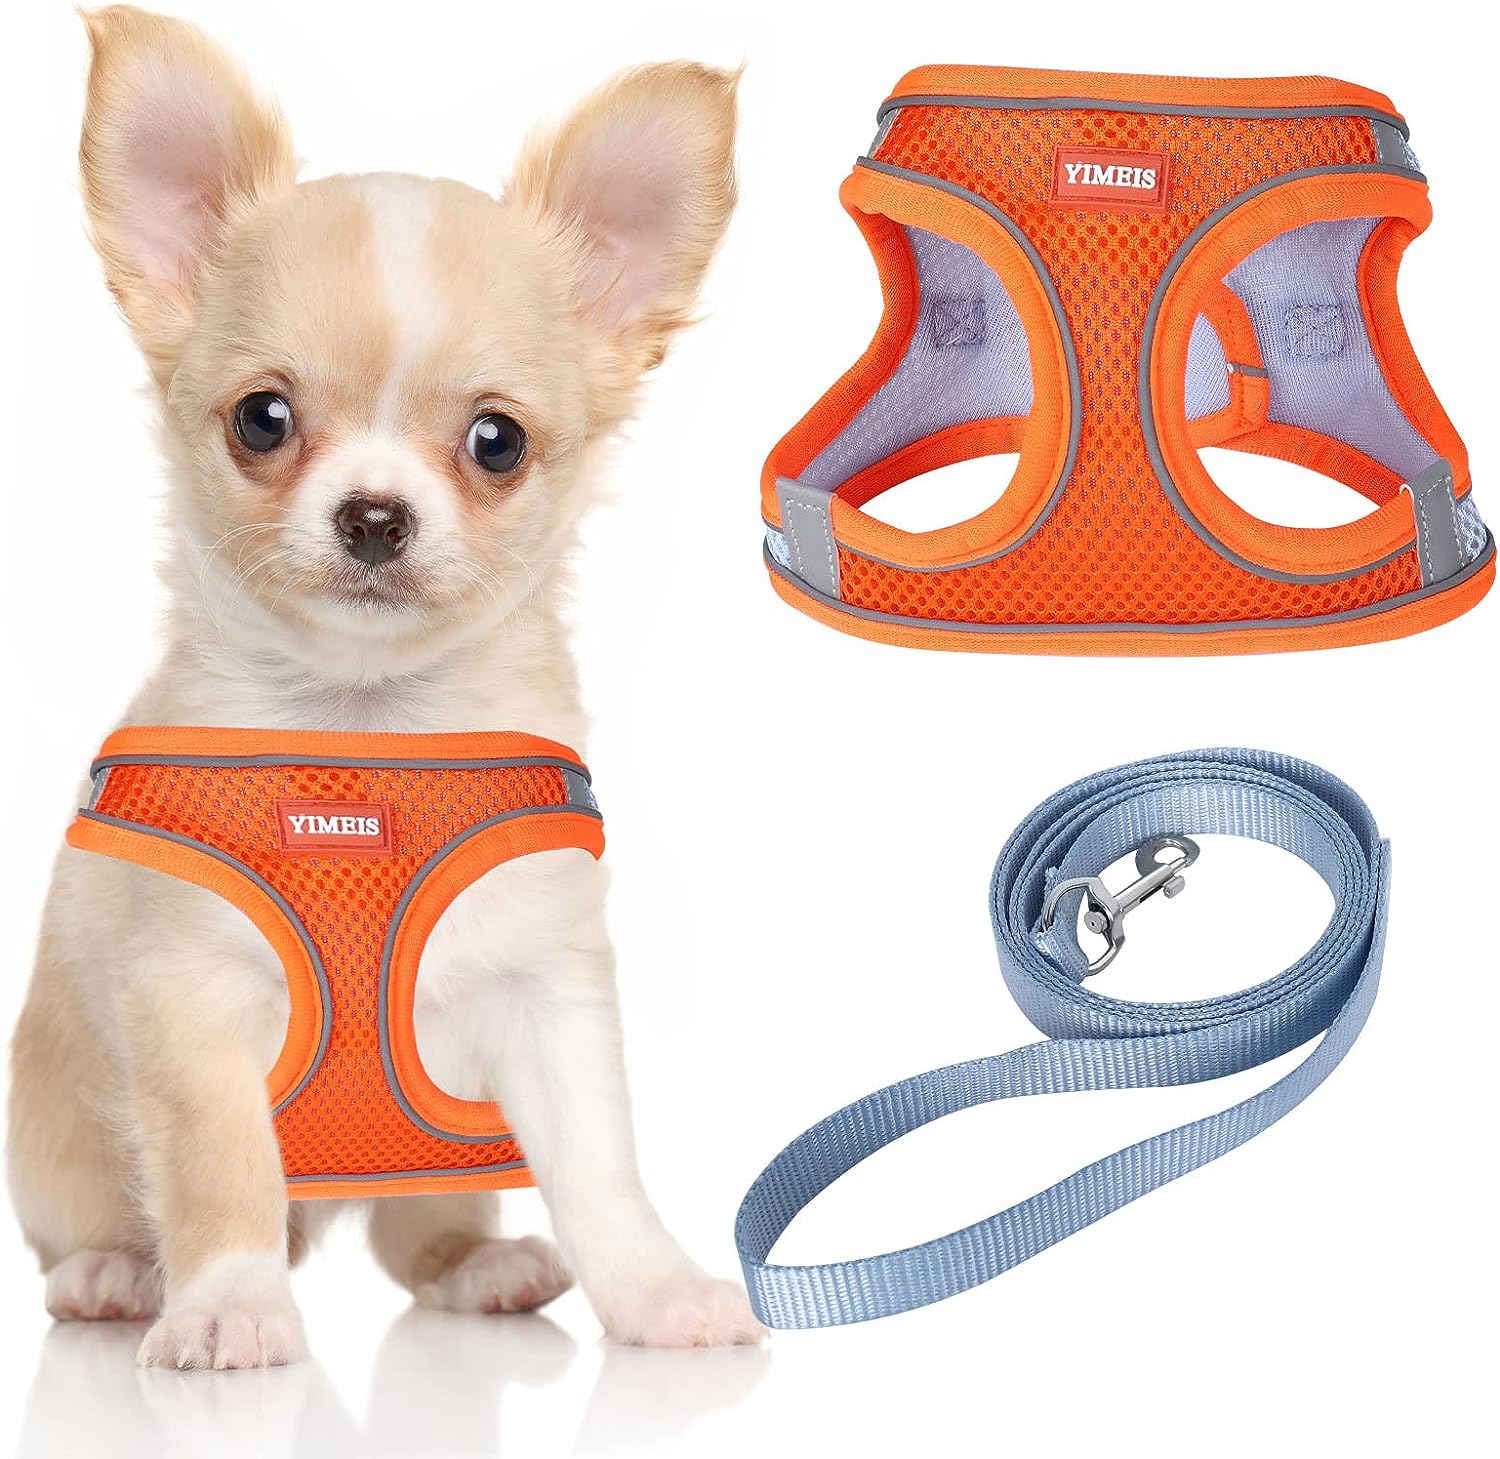 YIMEIS Dog Harness and Leash Set, No Pull Soft Mesh Pet Harness, Reflective Adjustable Puppy Vest for Small Medium Large Dogs, Cats (Orangeblue, Medium (Pack of 1))